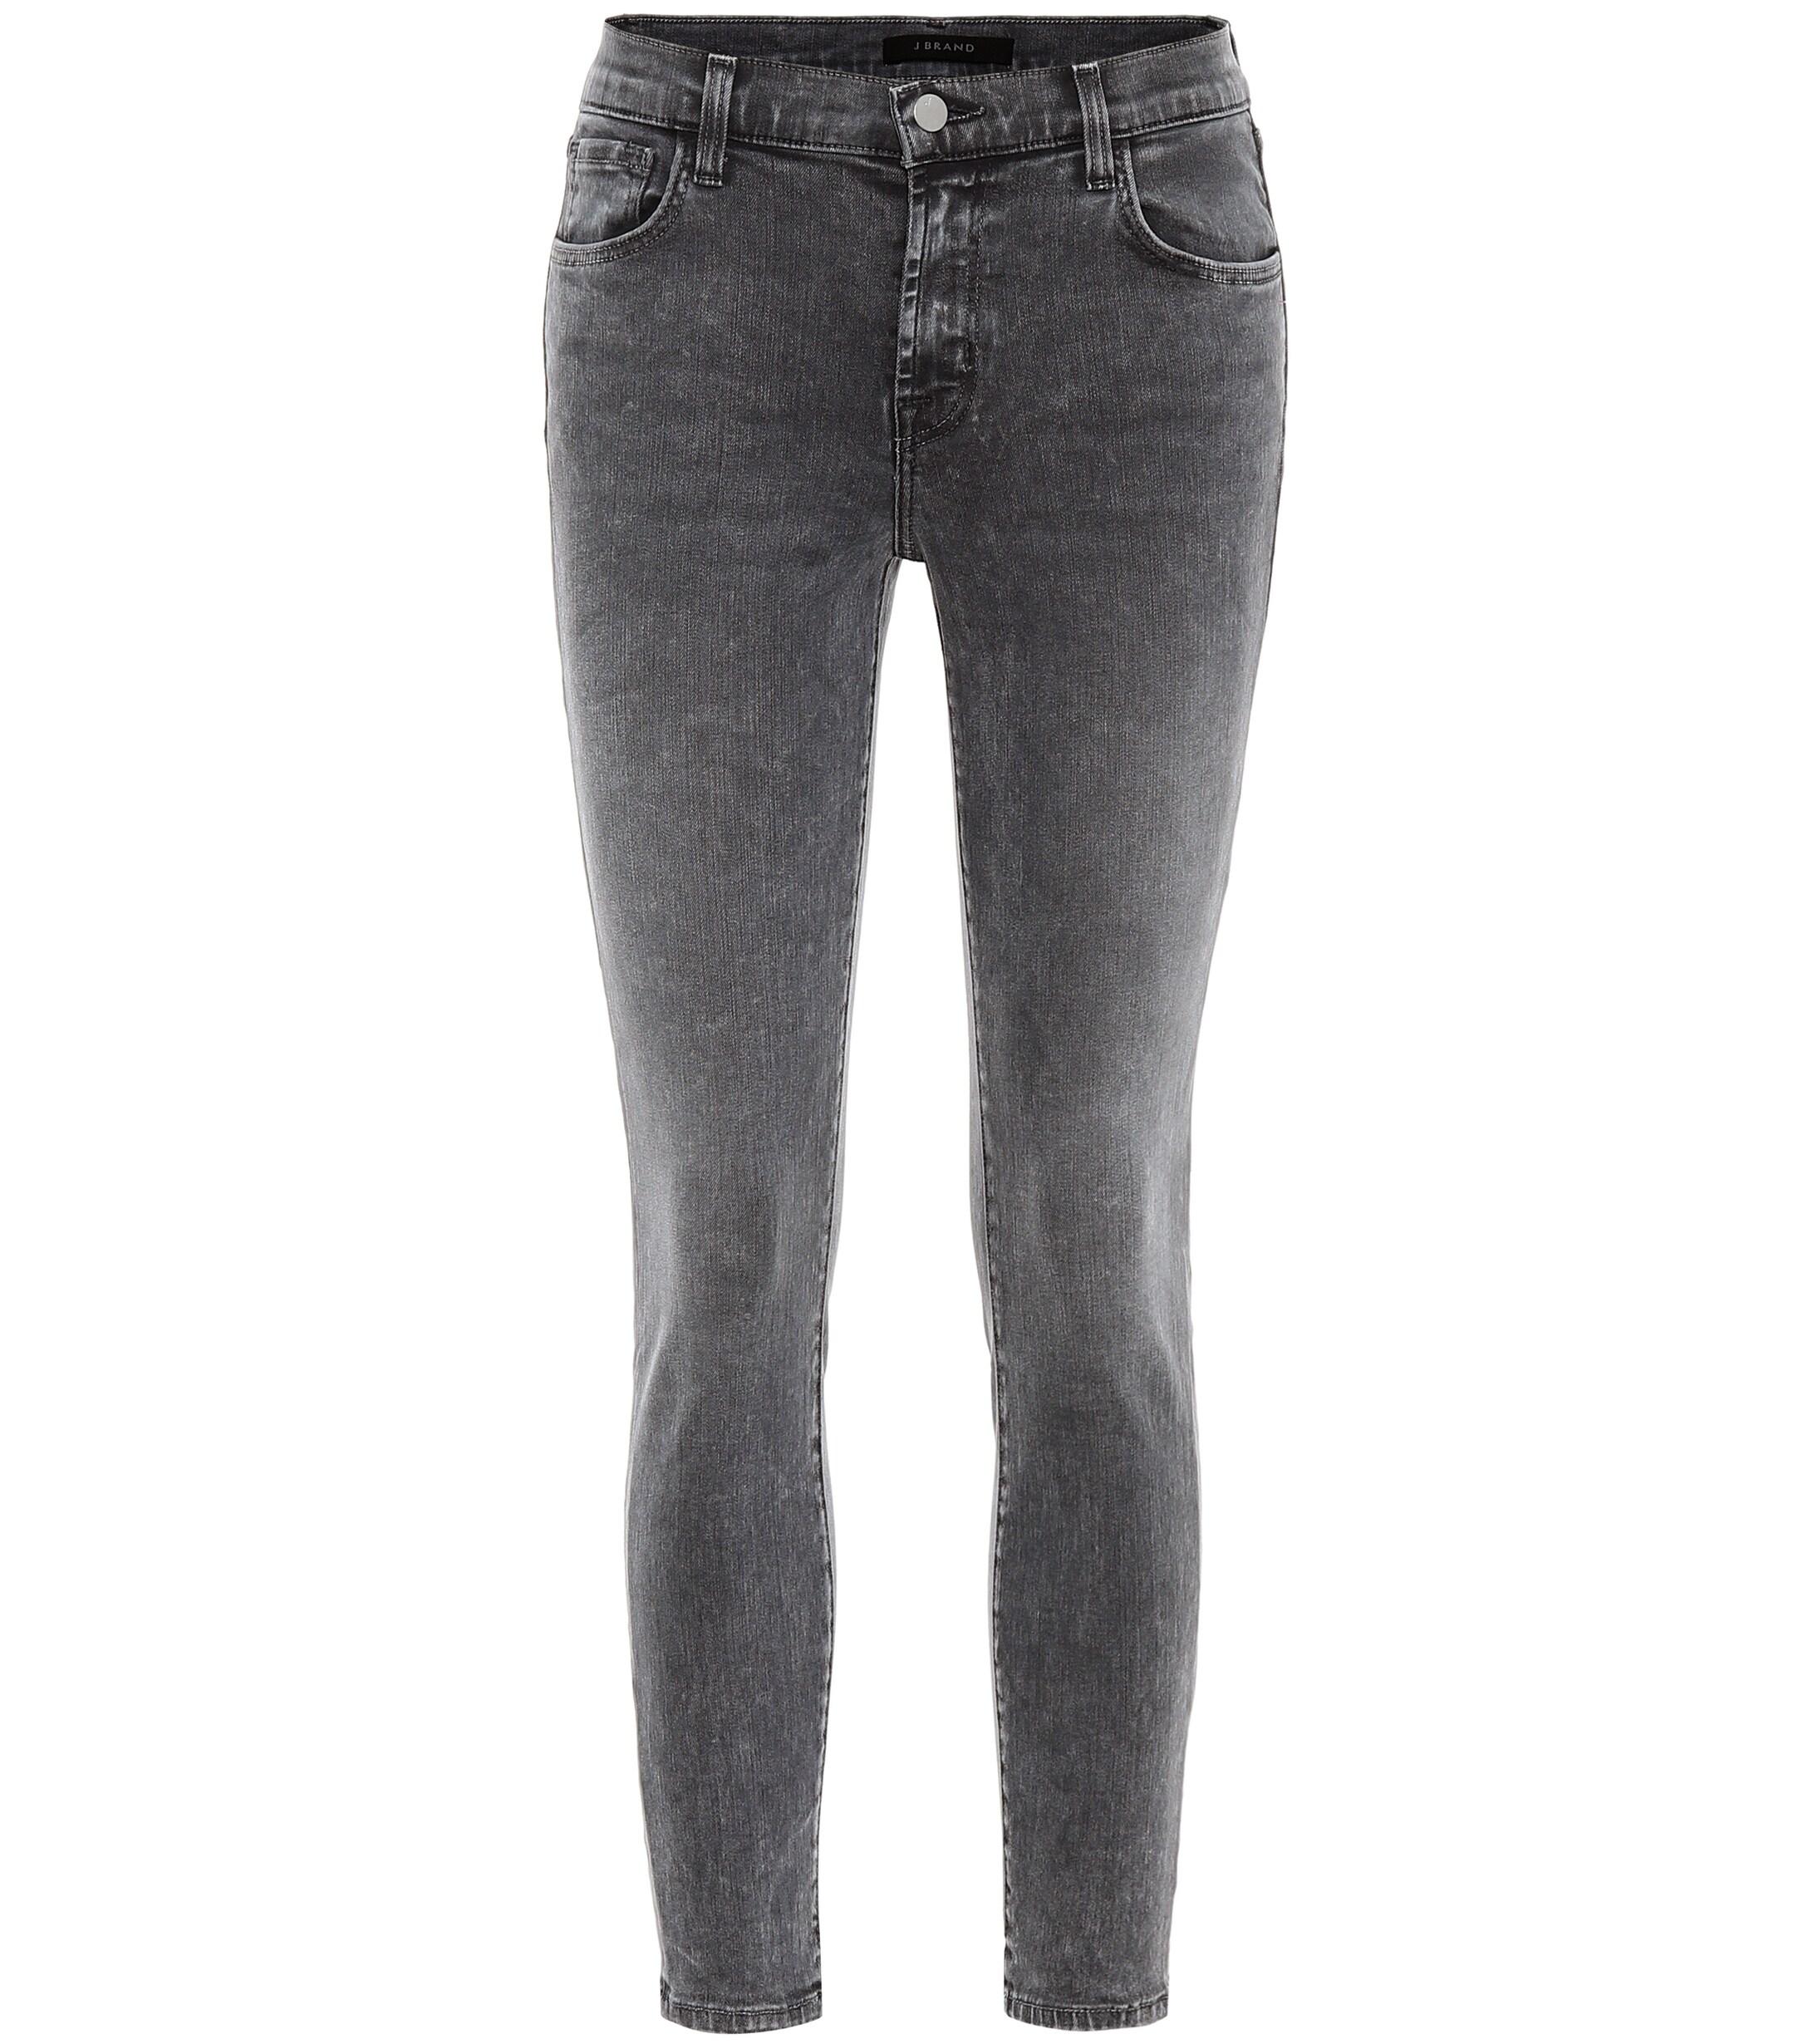 J Brand Denim 835 Cropped Mid-rise Skinny Jeans in Grey (Gray) - Lyst